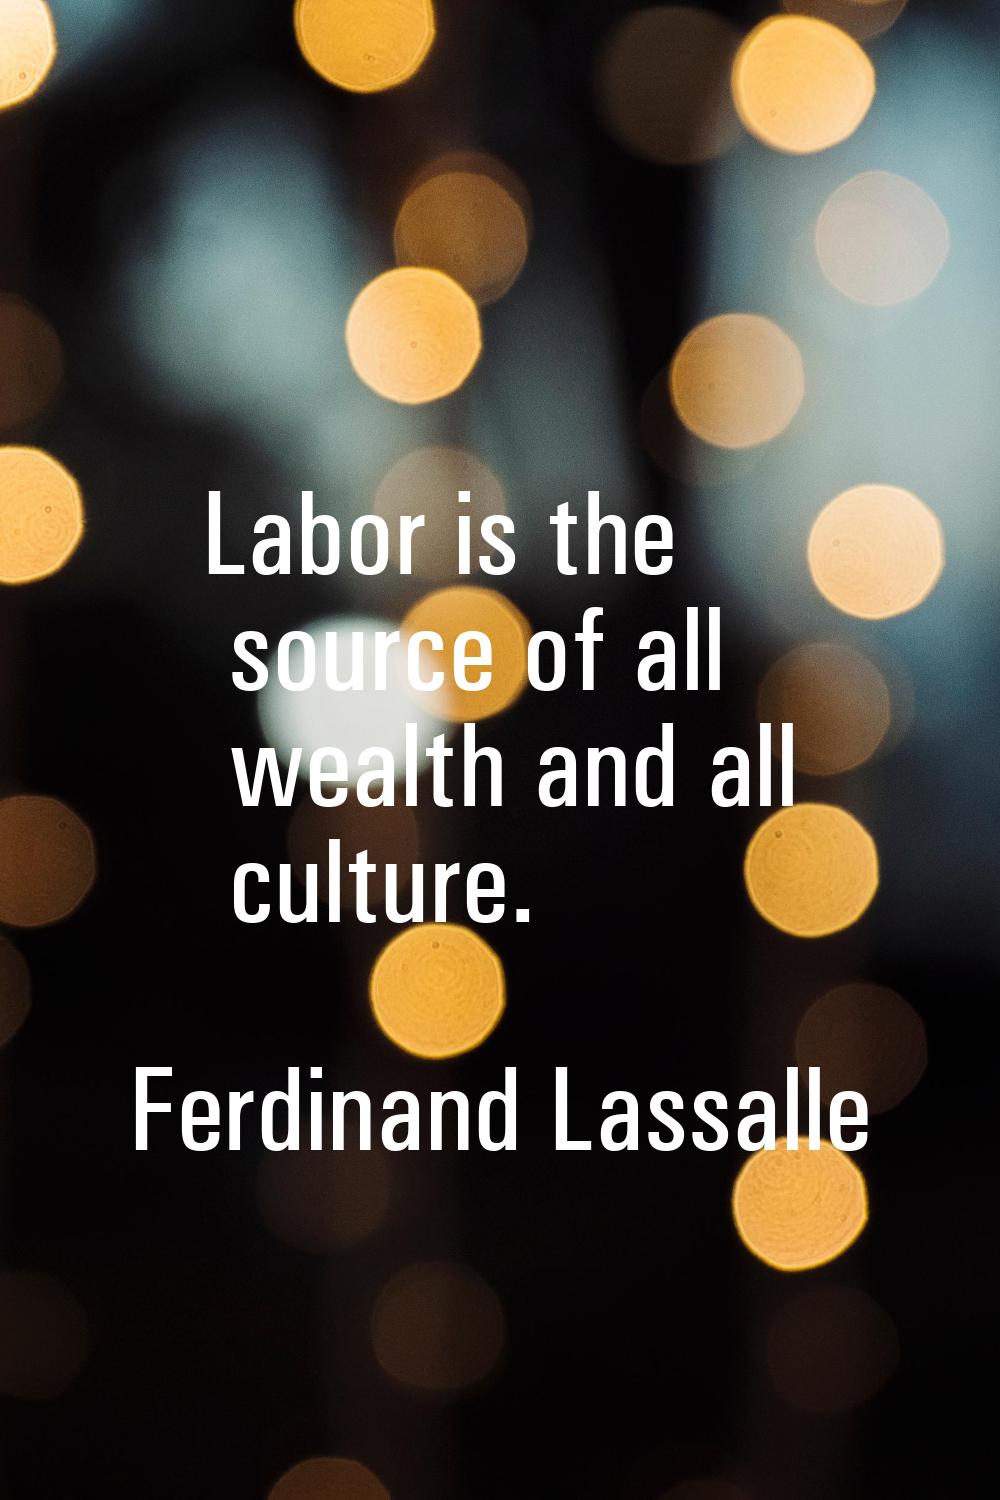 Labor is the source of all wealth and all culture.